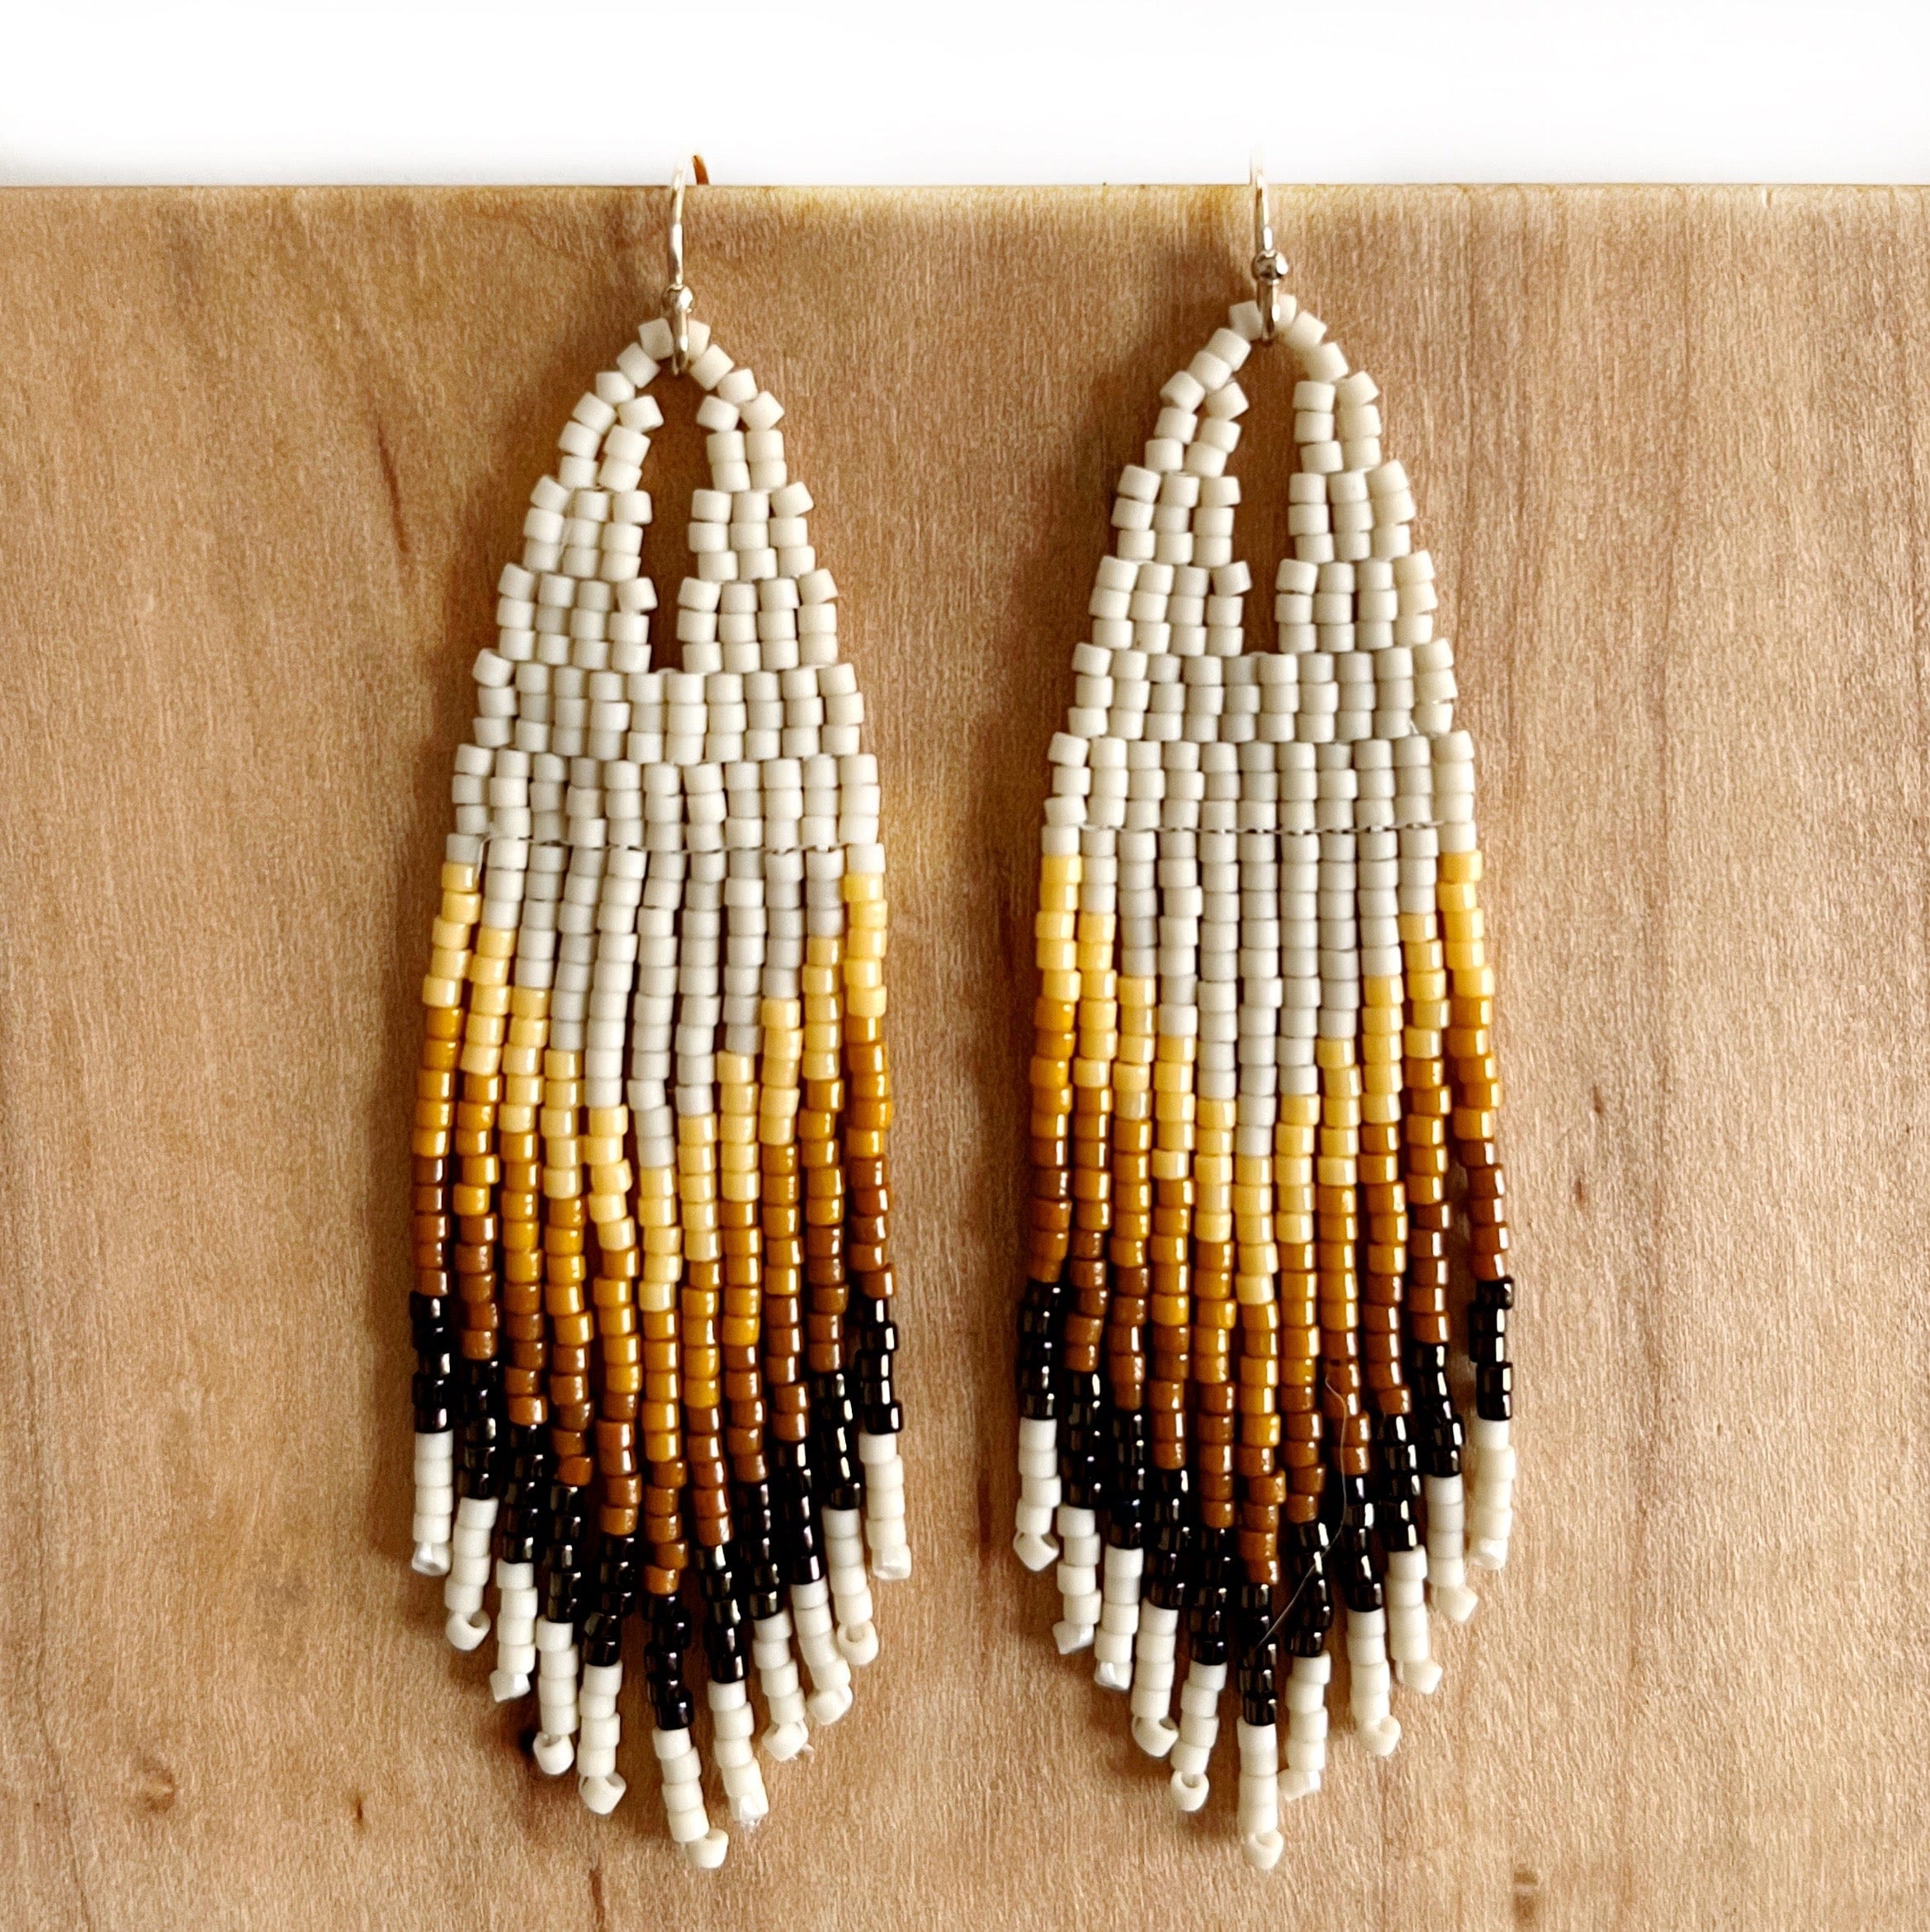 Lillie Nell Híshi Earrings in Canyon